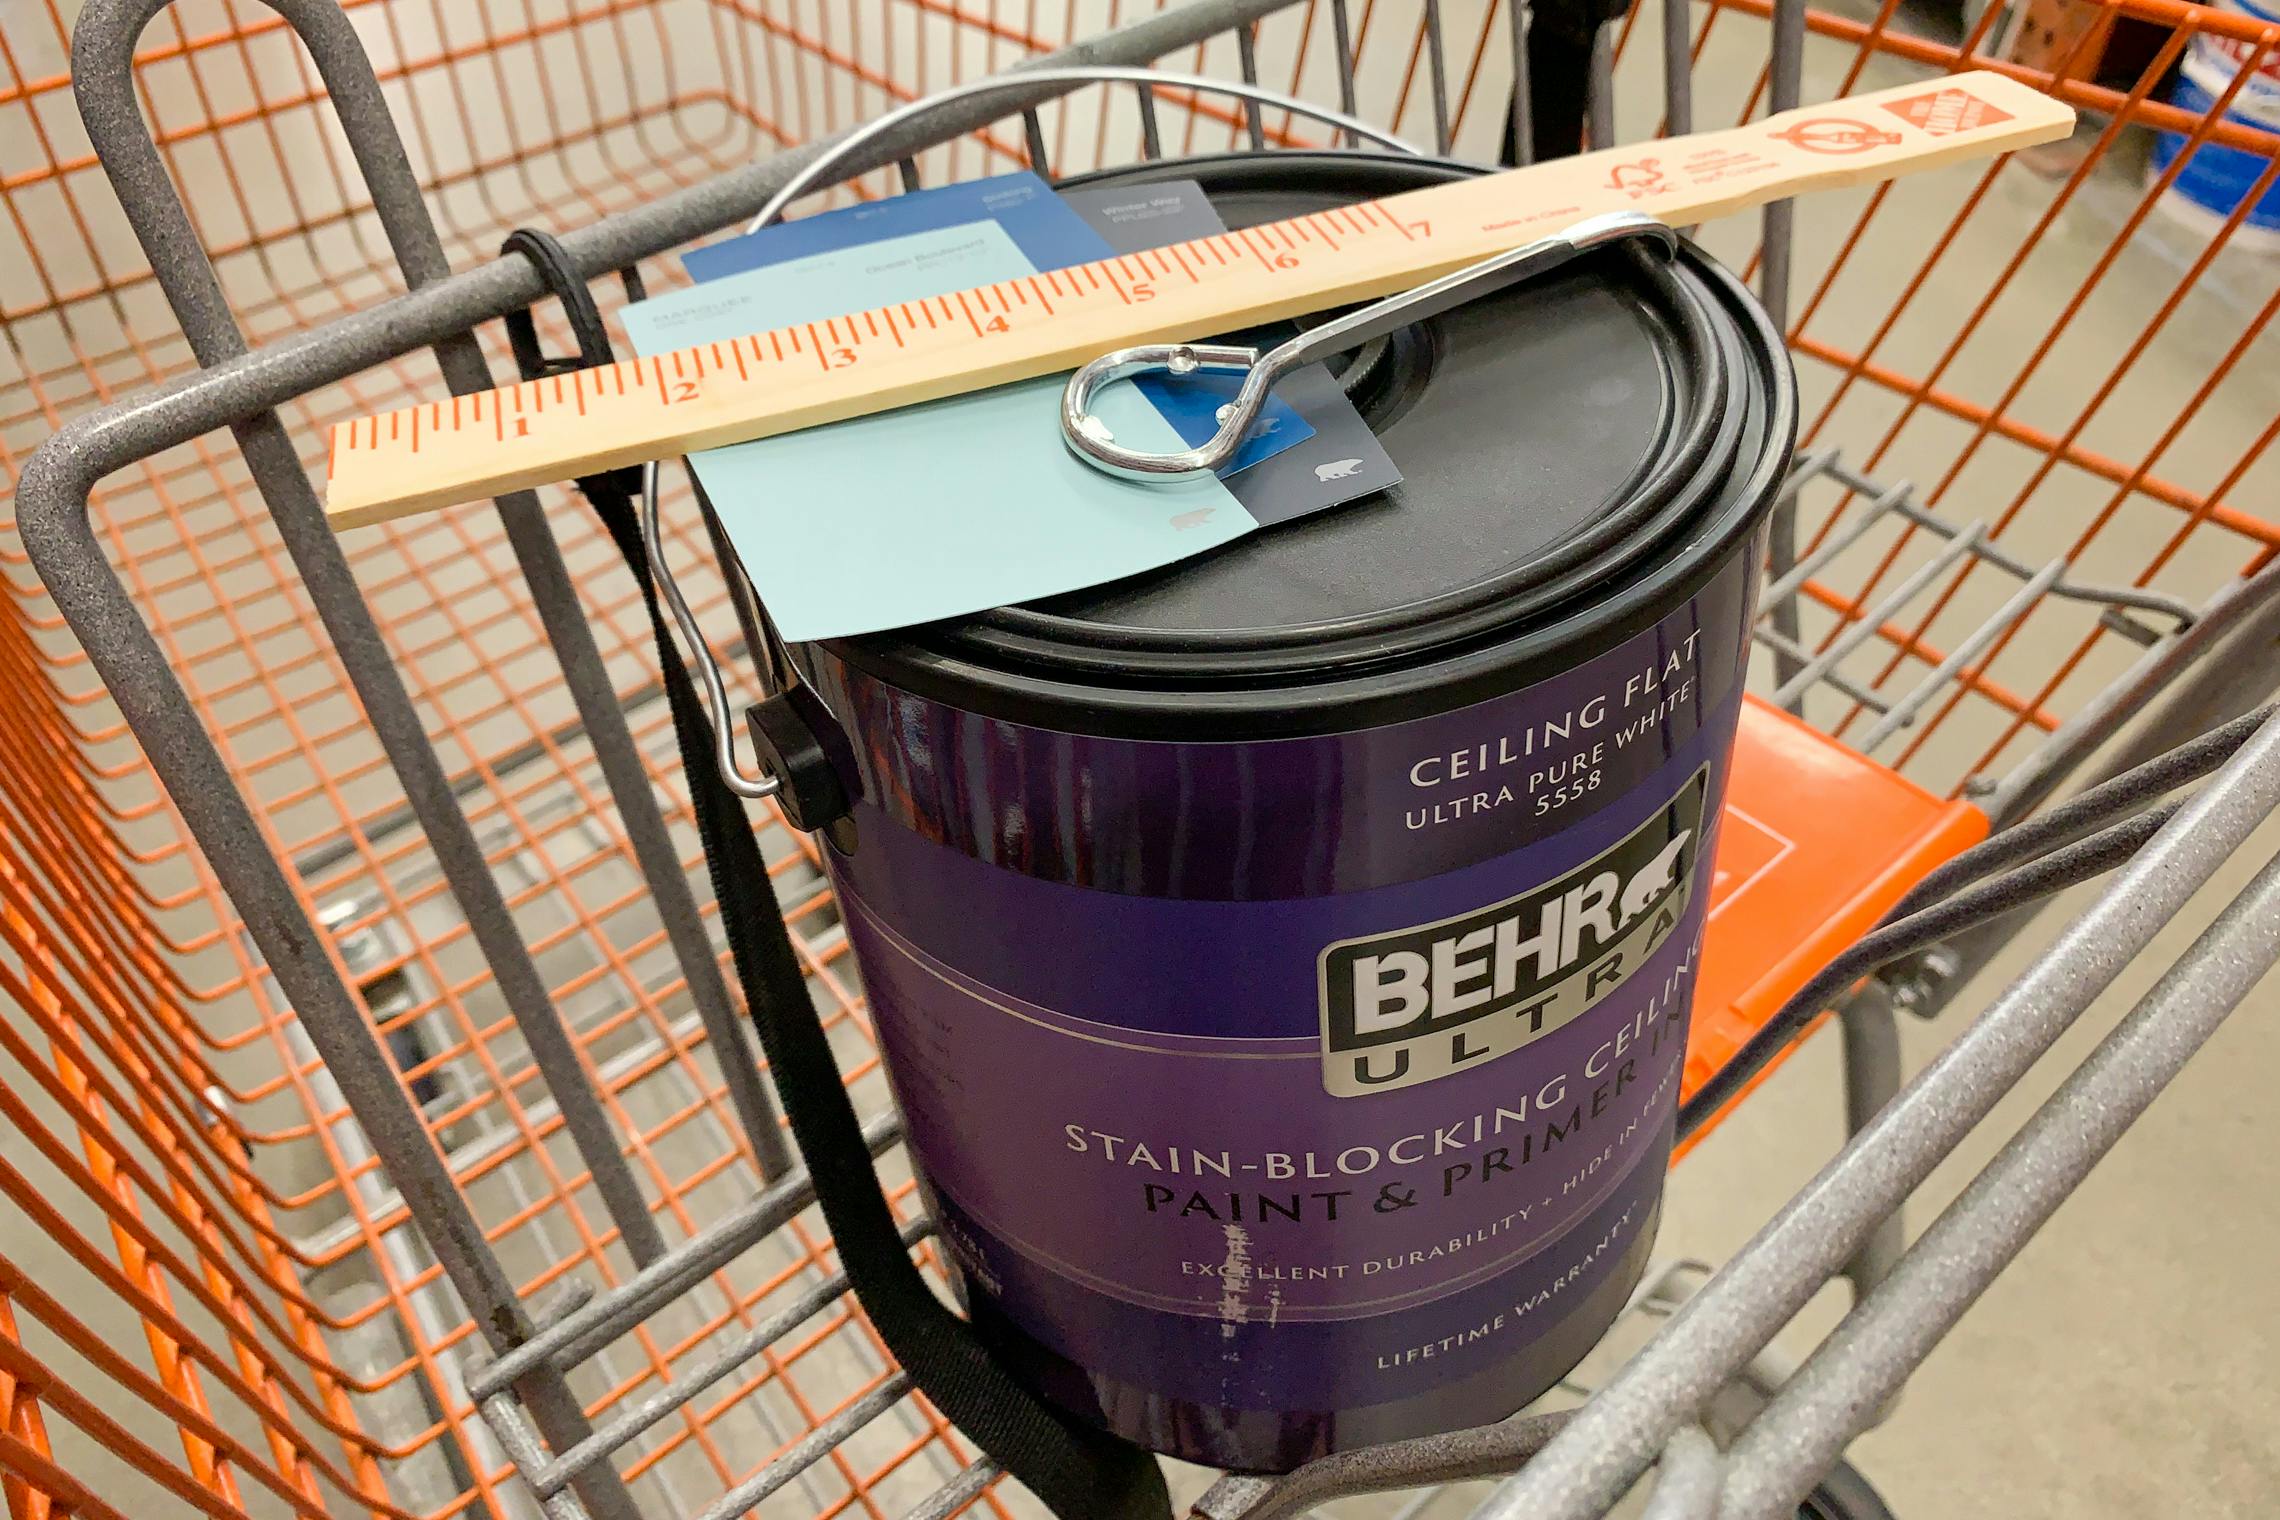 Does Home Depot Give Free Paint Samples In 2022? (Guide)